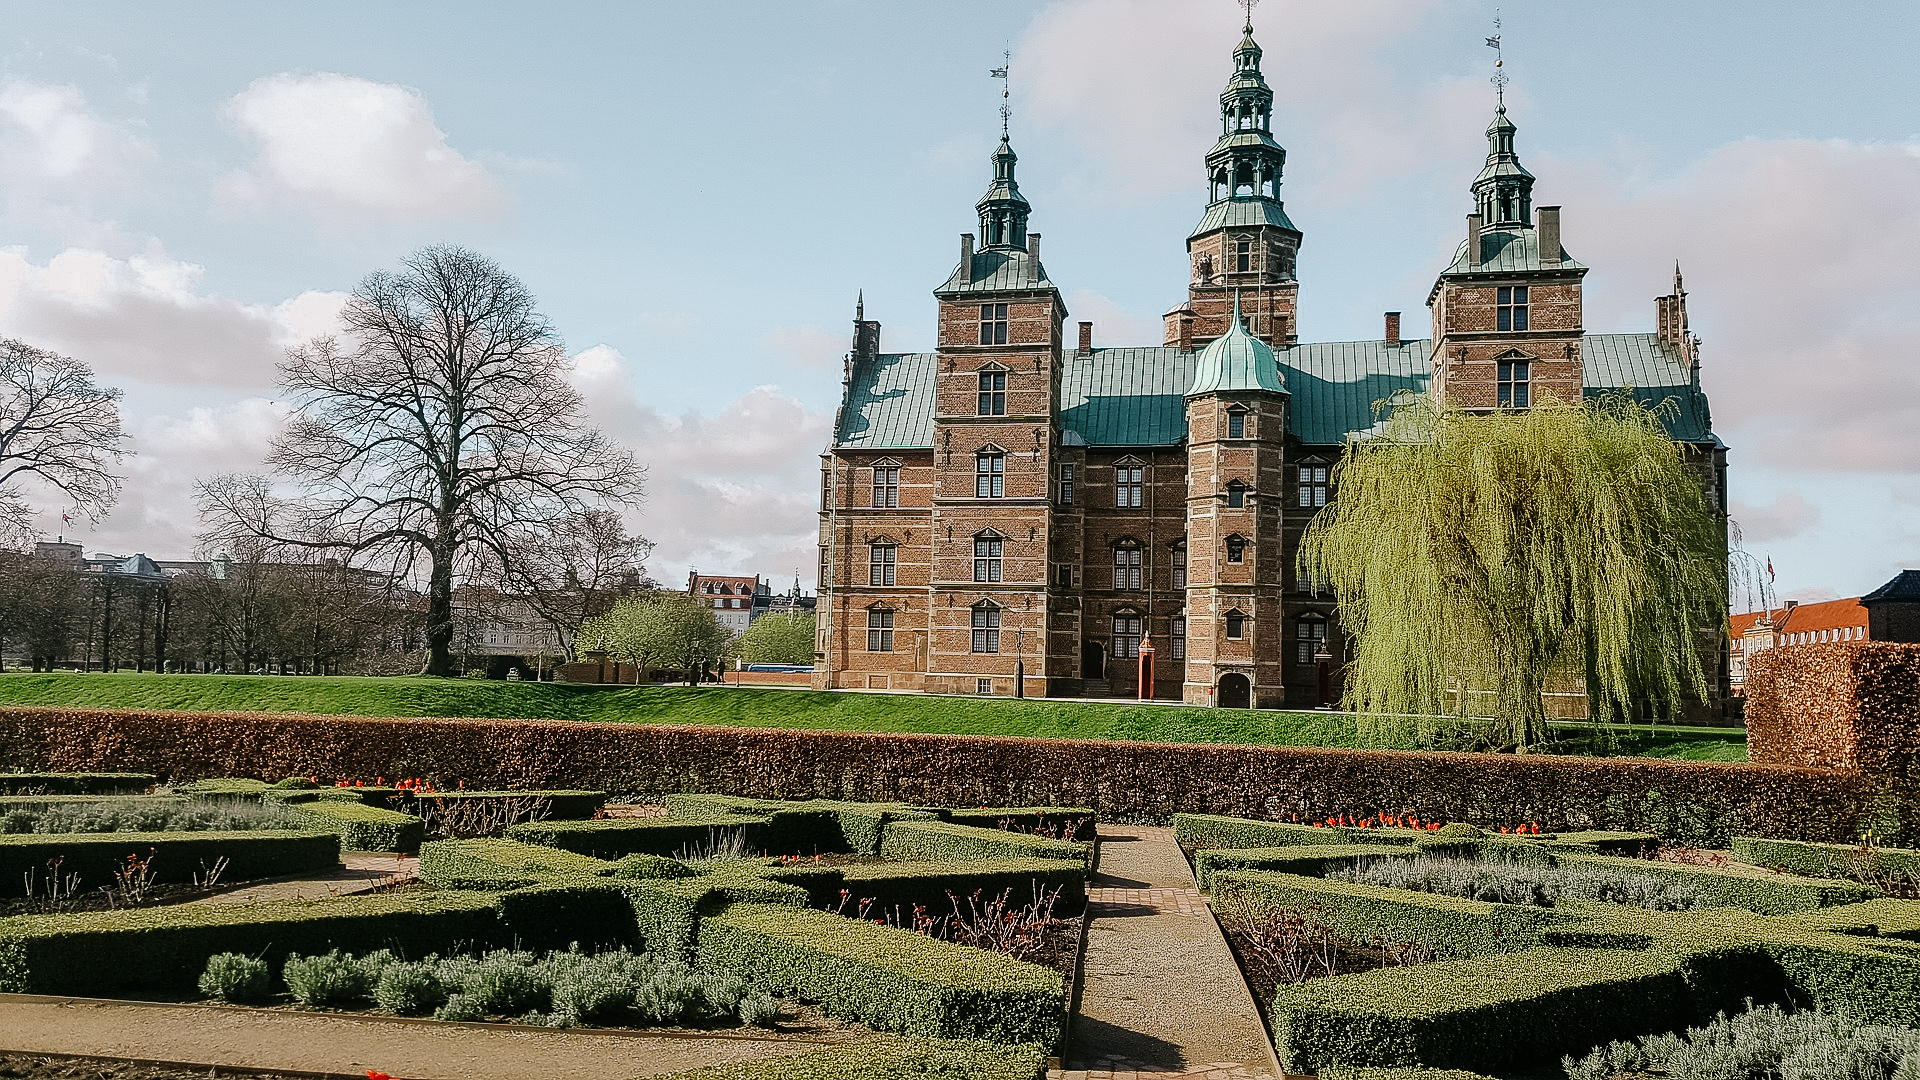 A view of Rosenburg castle in Copenhagen from the side, with a garden of trimmed hedge busges in the foreground, and willow trees near the castle.